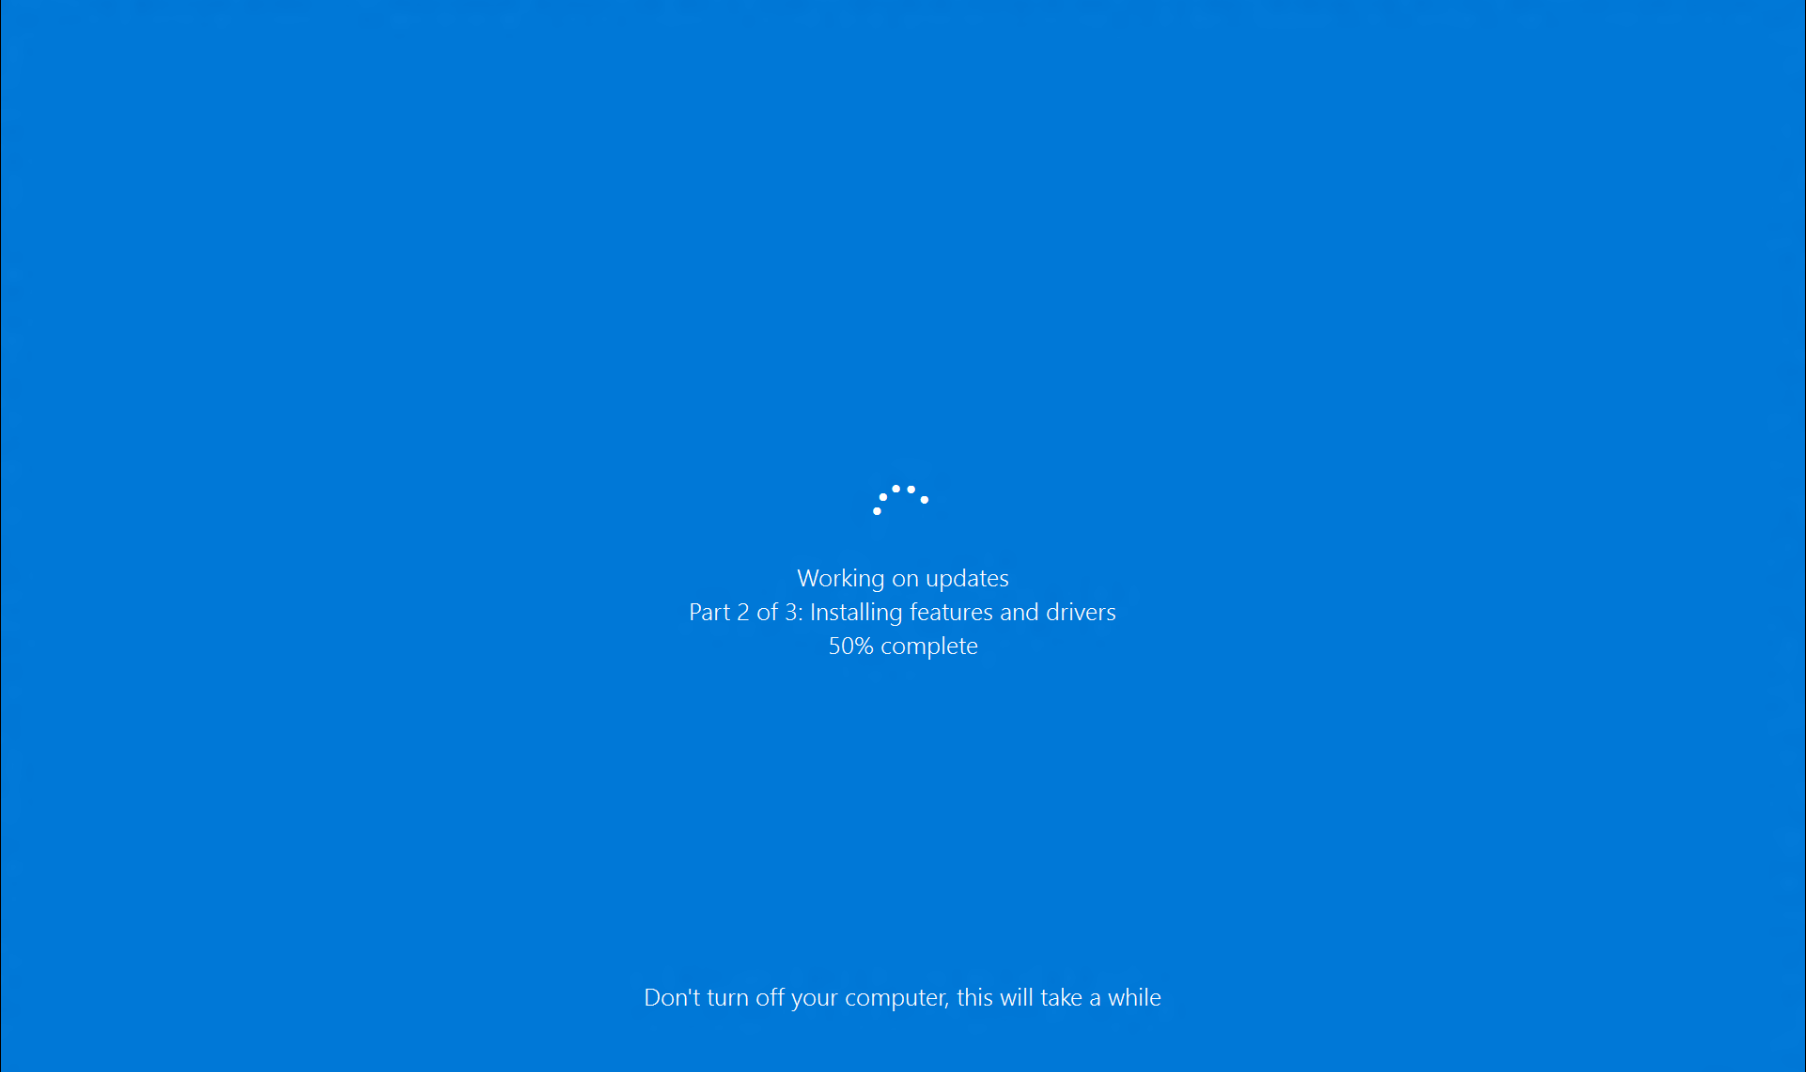 Slow Computer after Windows 10 Fall Creators Update?